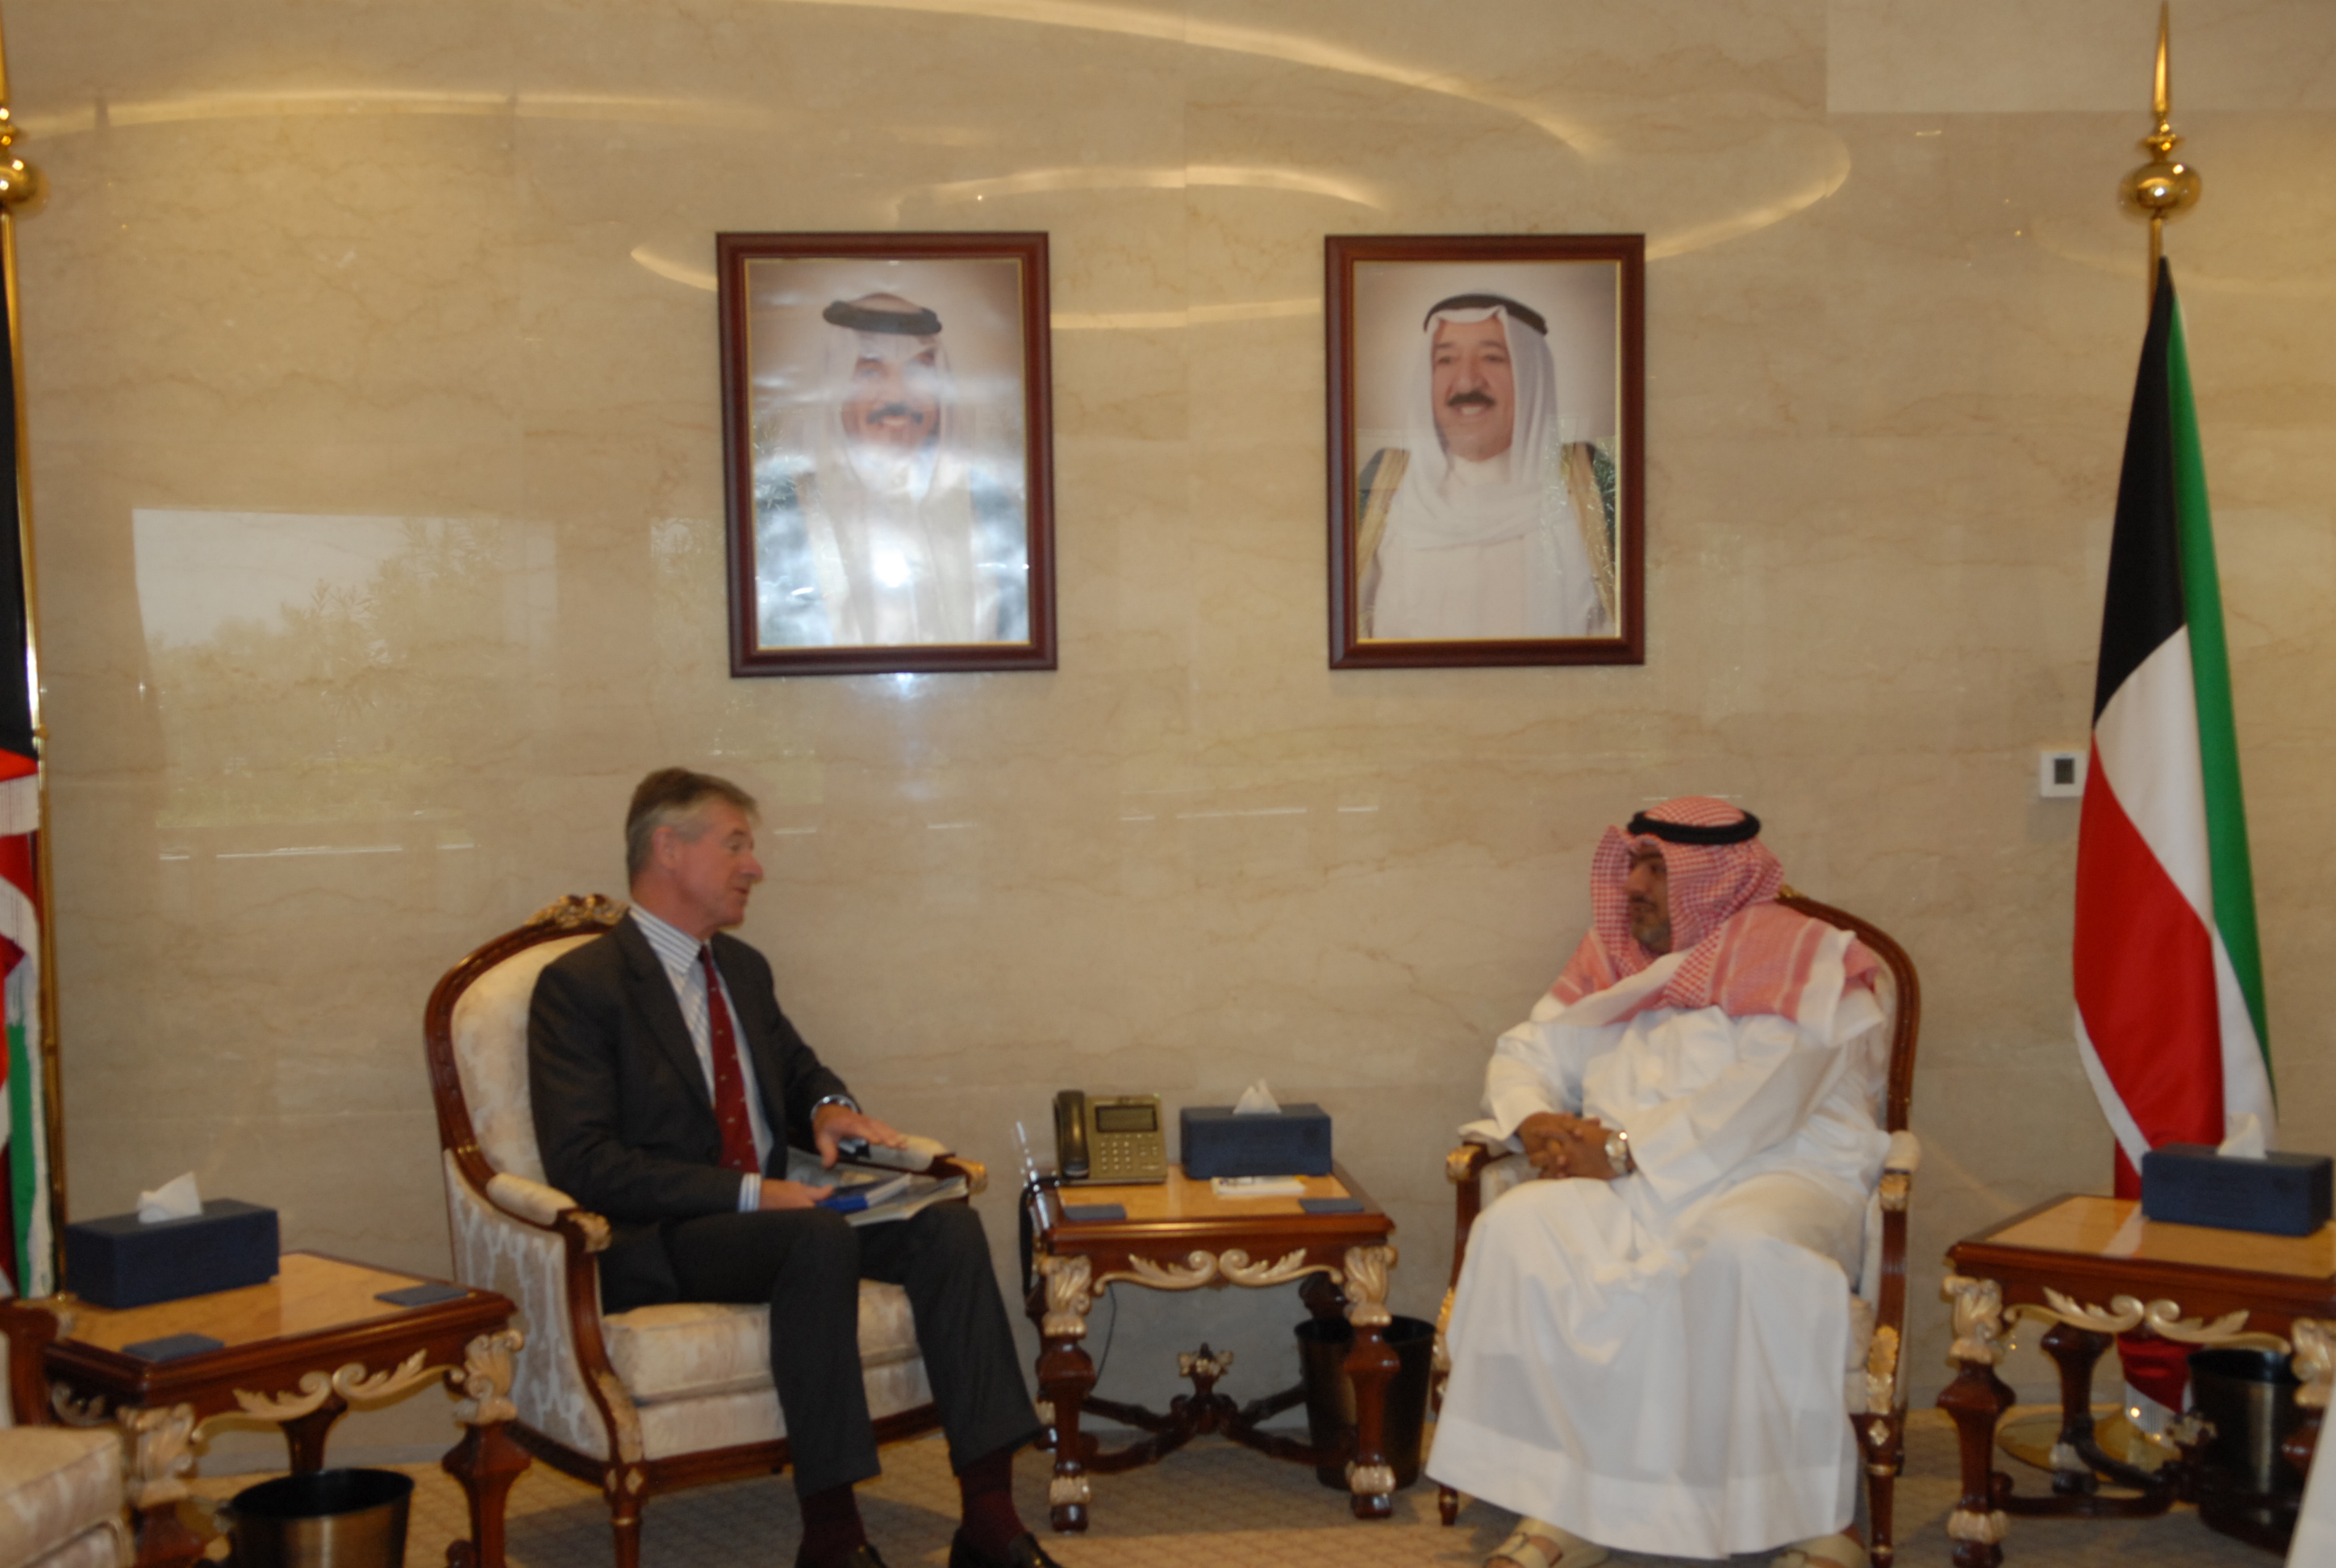 Kuwait security chief discusses cooperation with head of renowned think tank